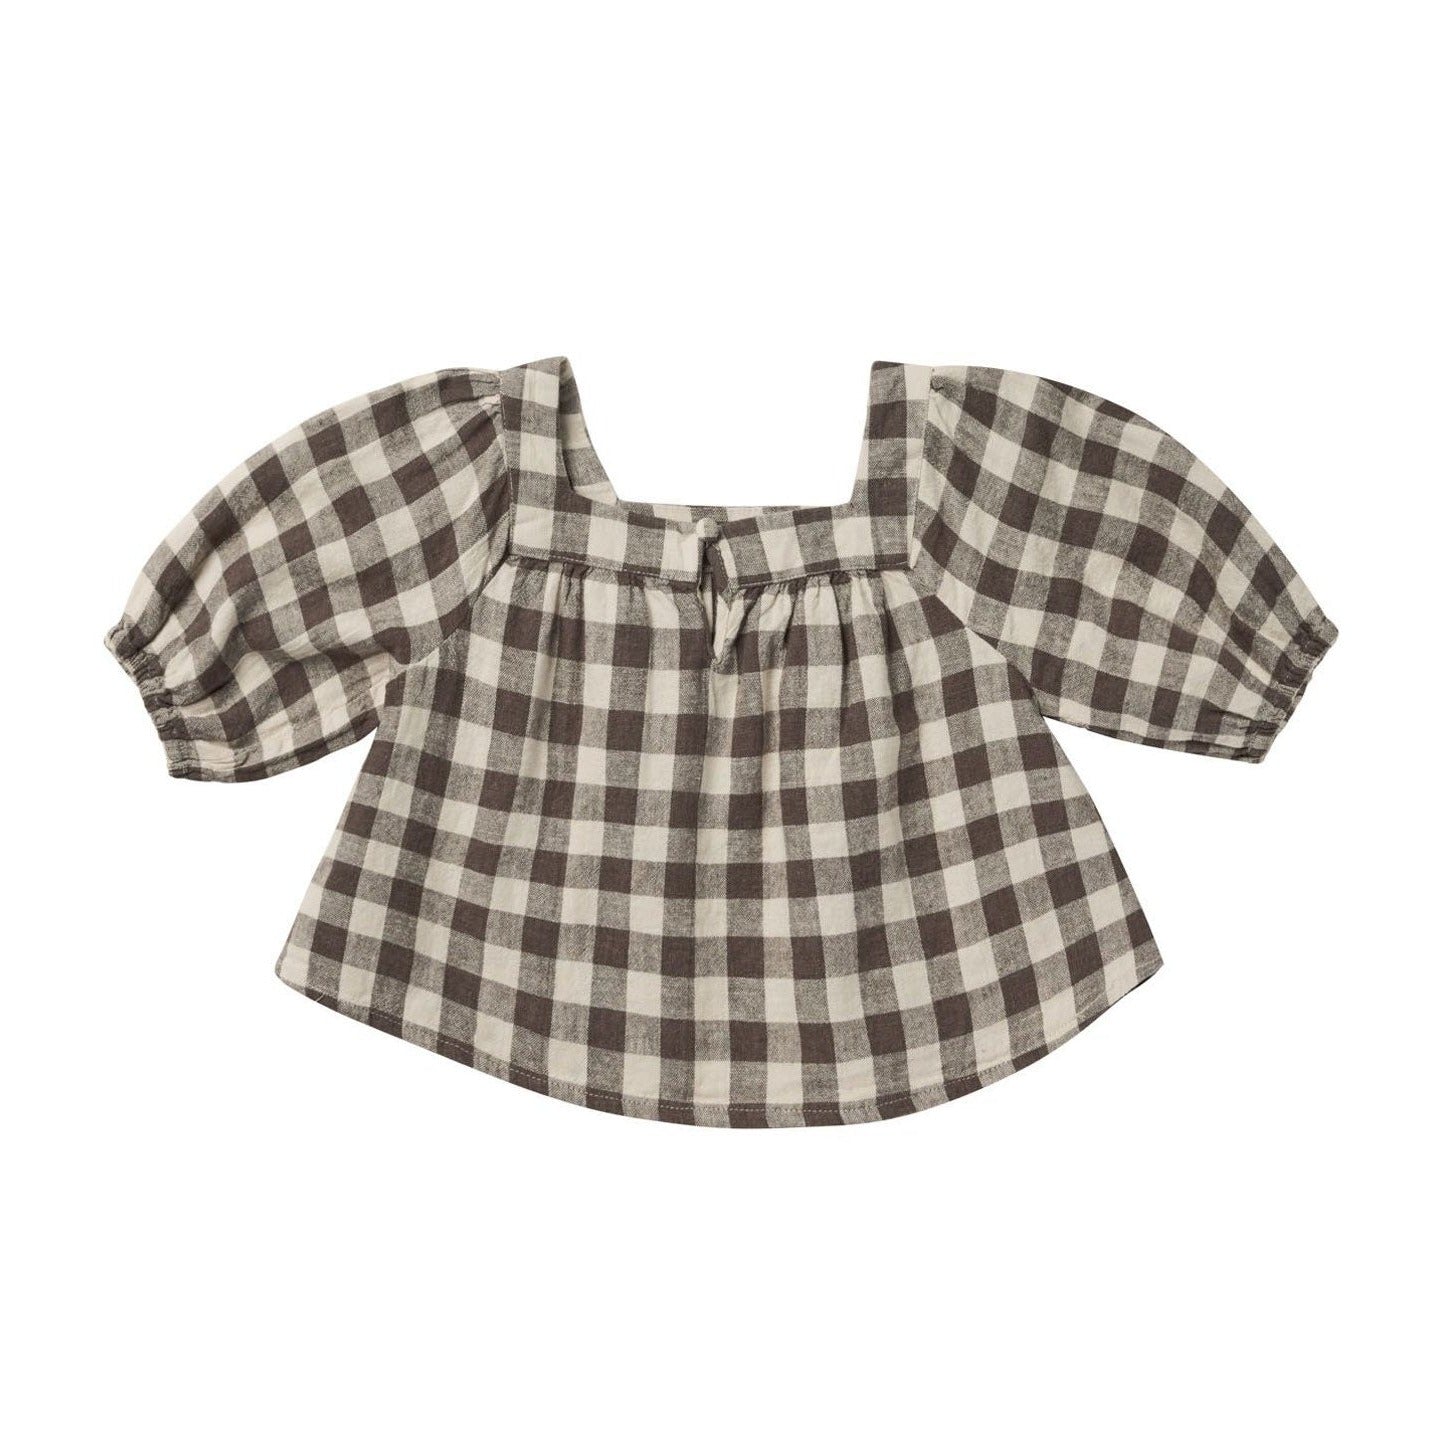 Rylee and Cru Gia Blouse - Charcoal Check - Natural / Charcoal 